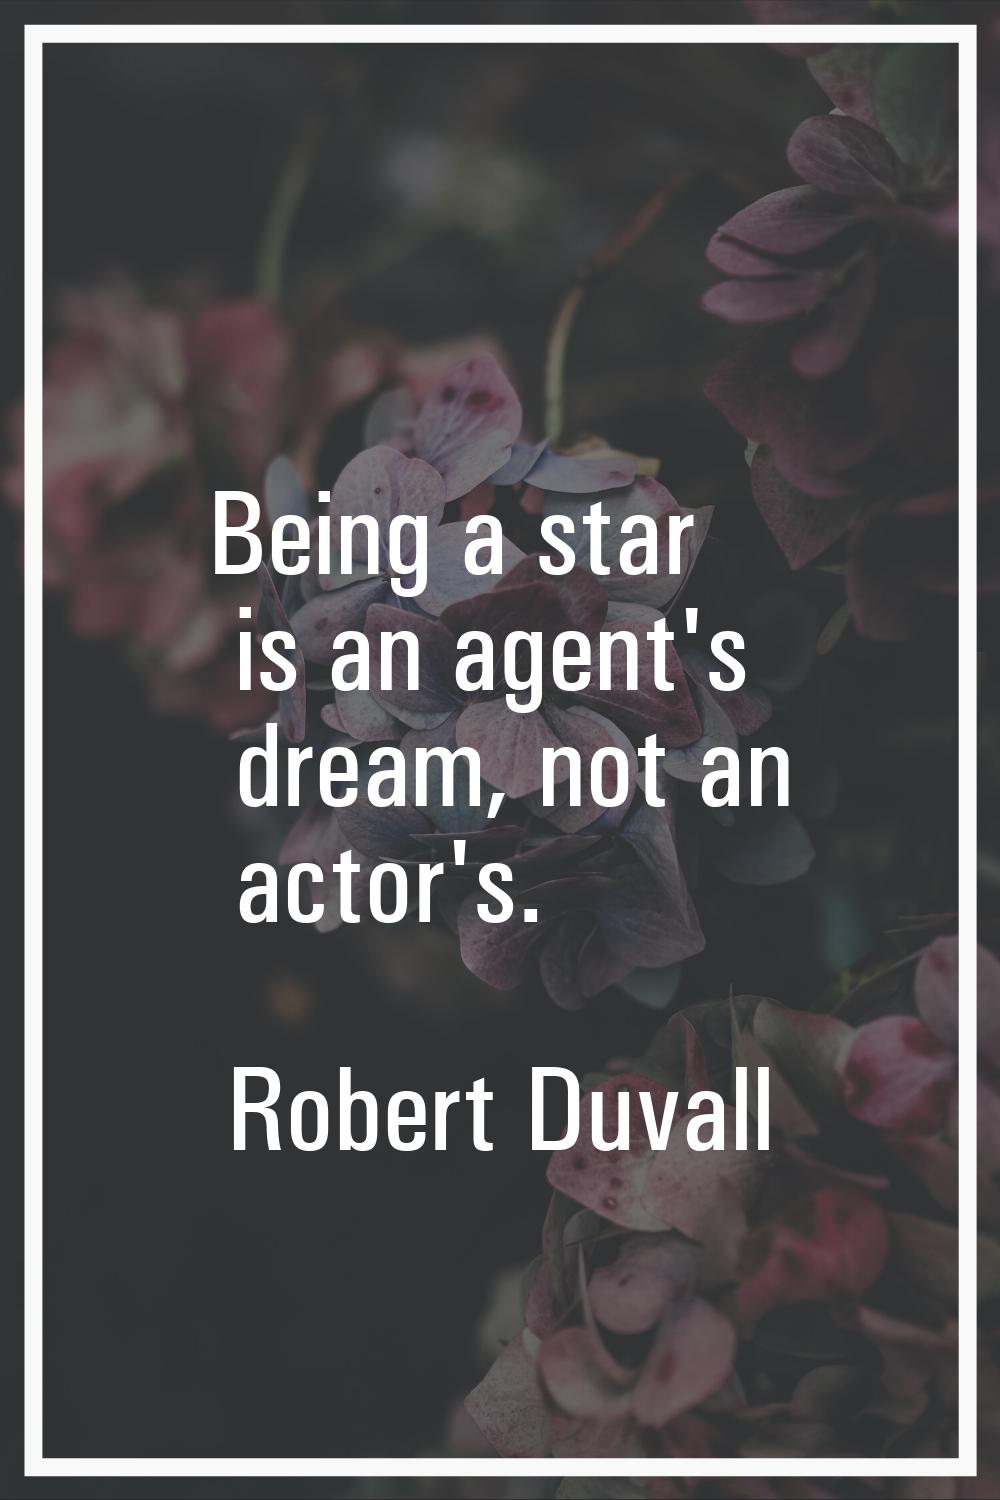 Being a star is an agent's dream, not an actor's.